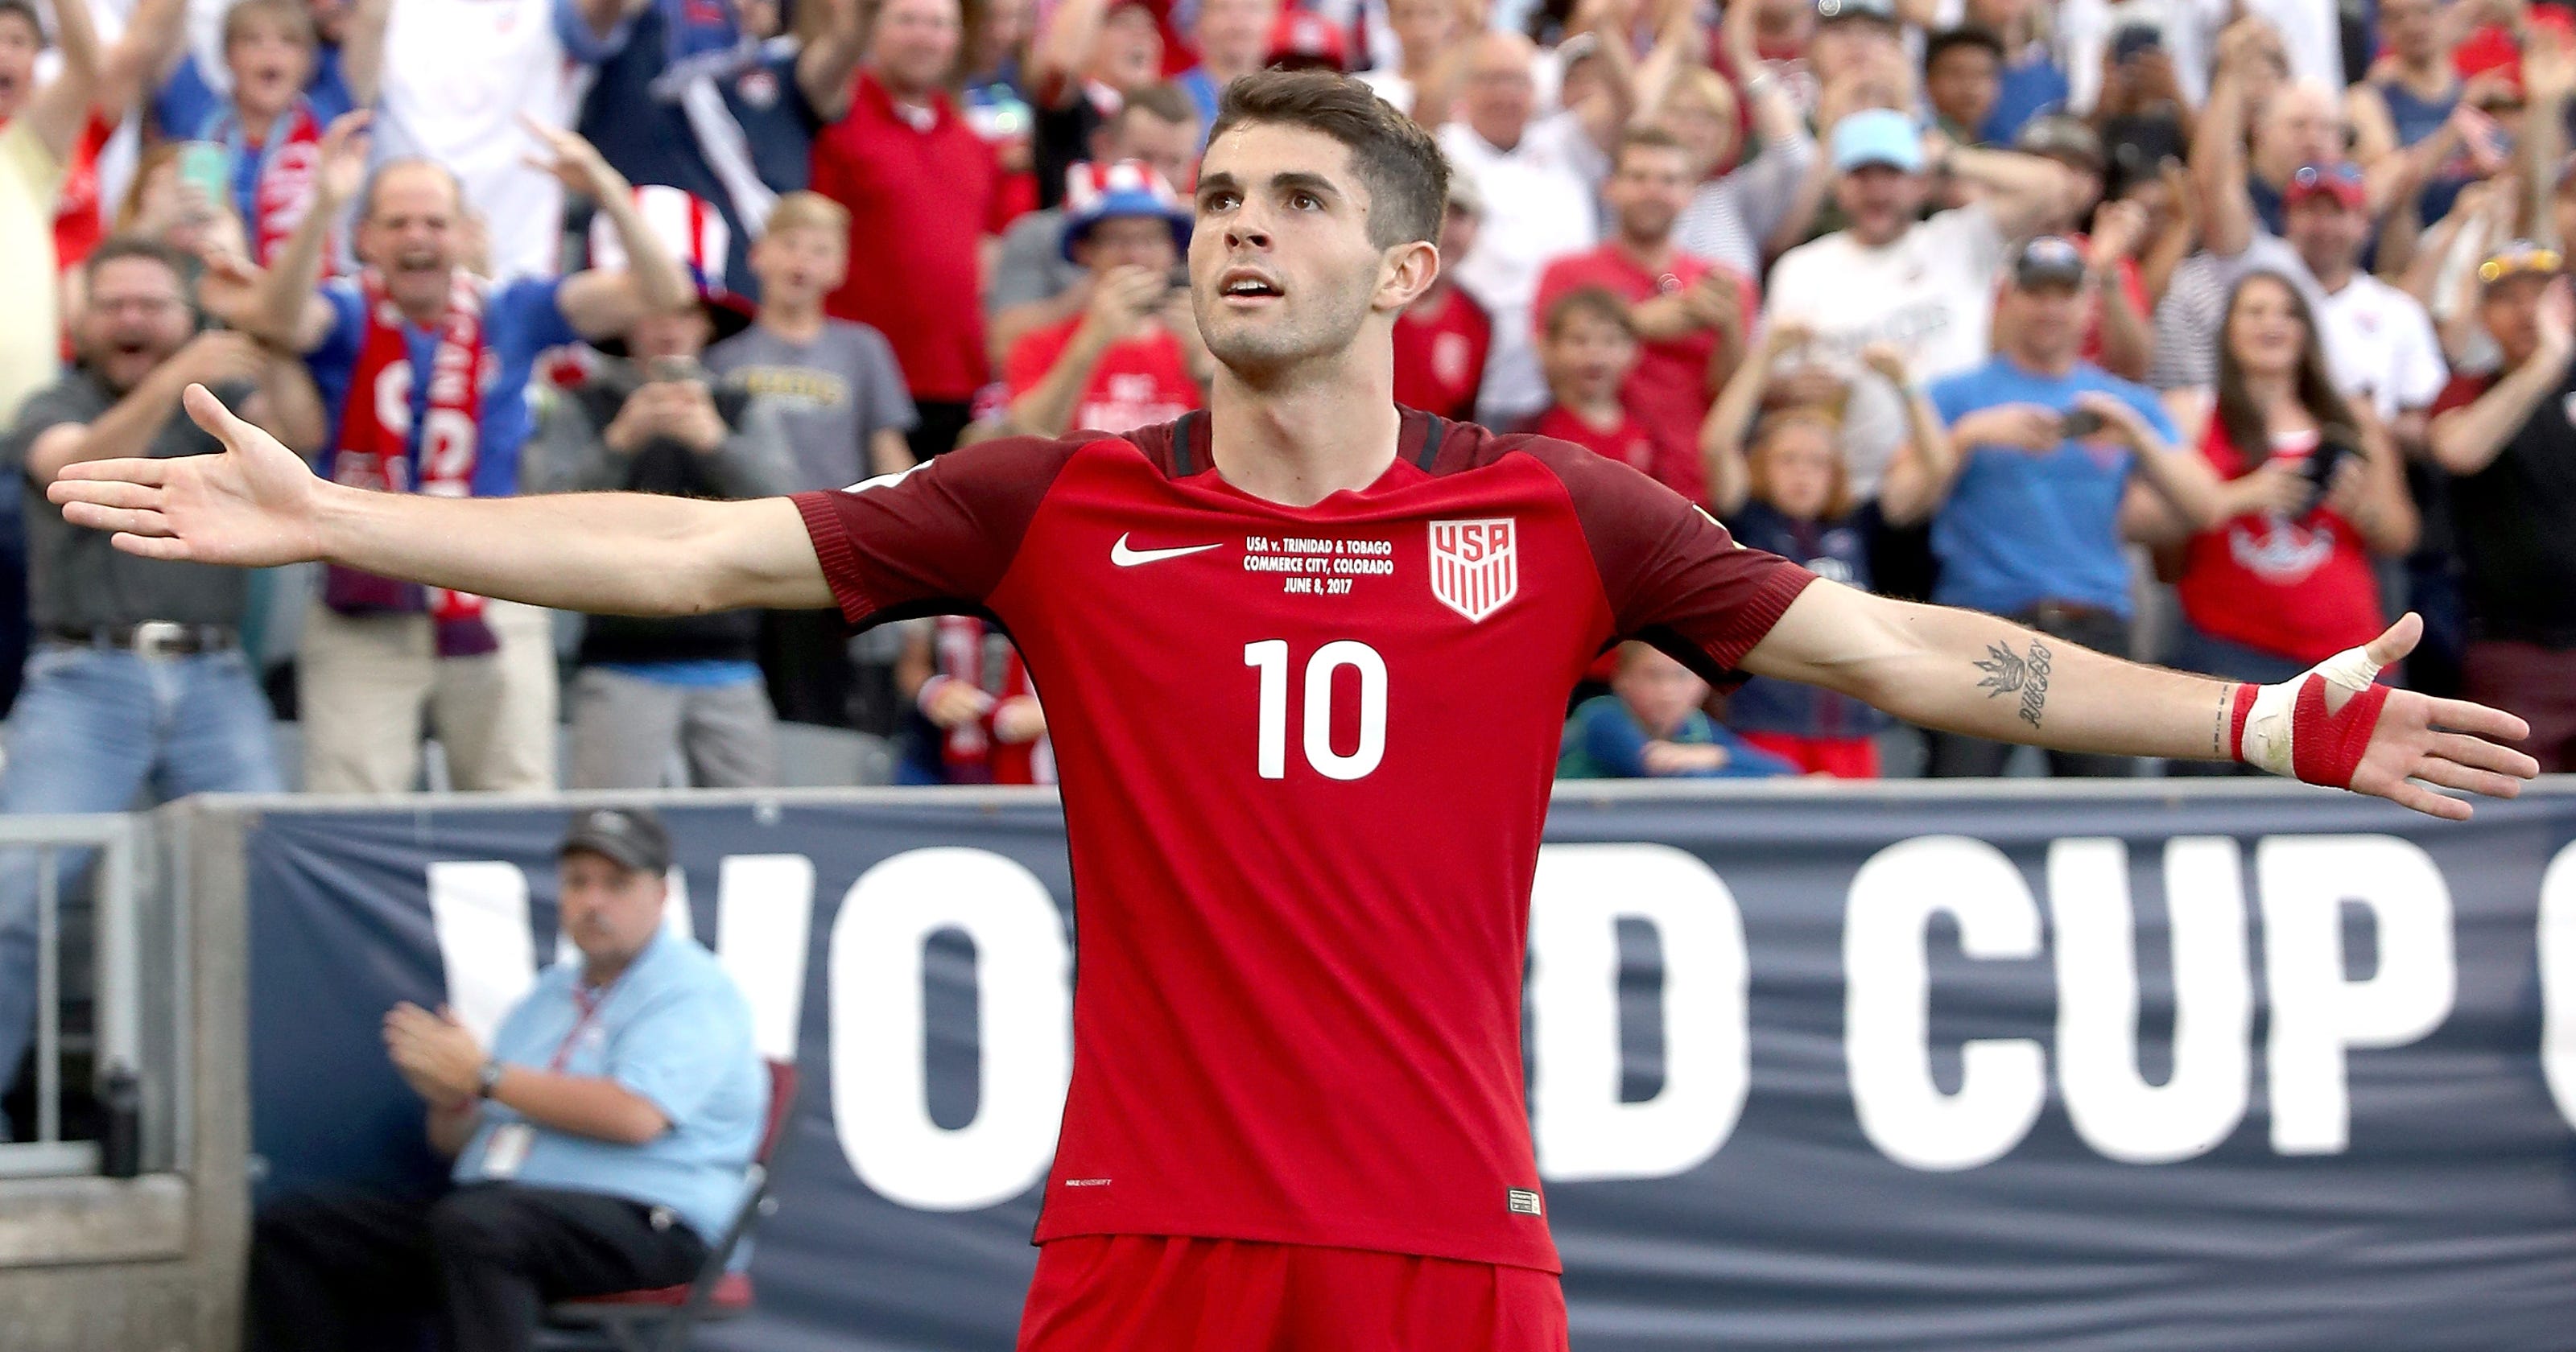 Christian Pulisic on U.S. Soccer's failure to reach World Cup